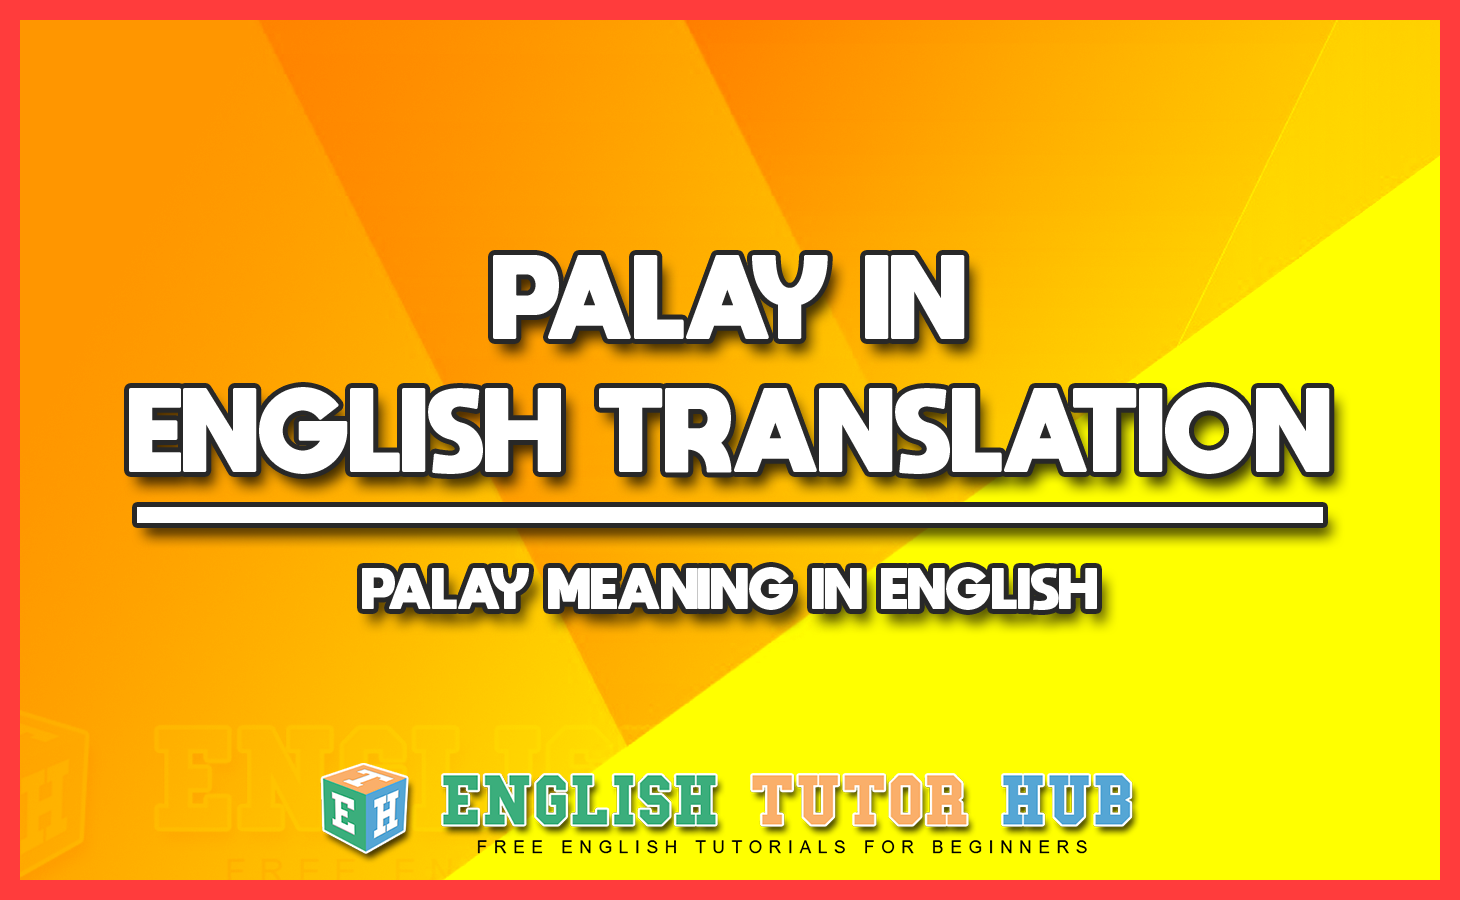 PALAY IN ENGLISH TRANSLATION - PALAY MEANING IN ENGLISH